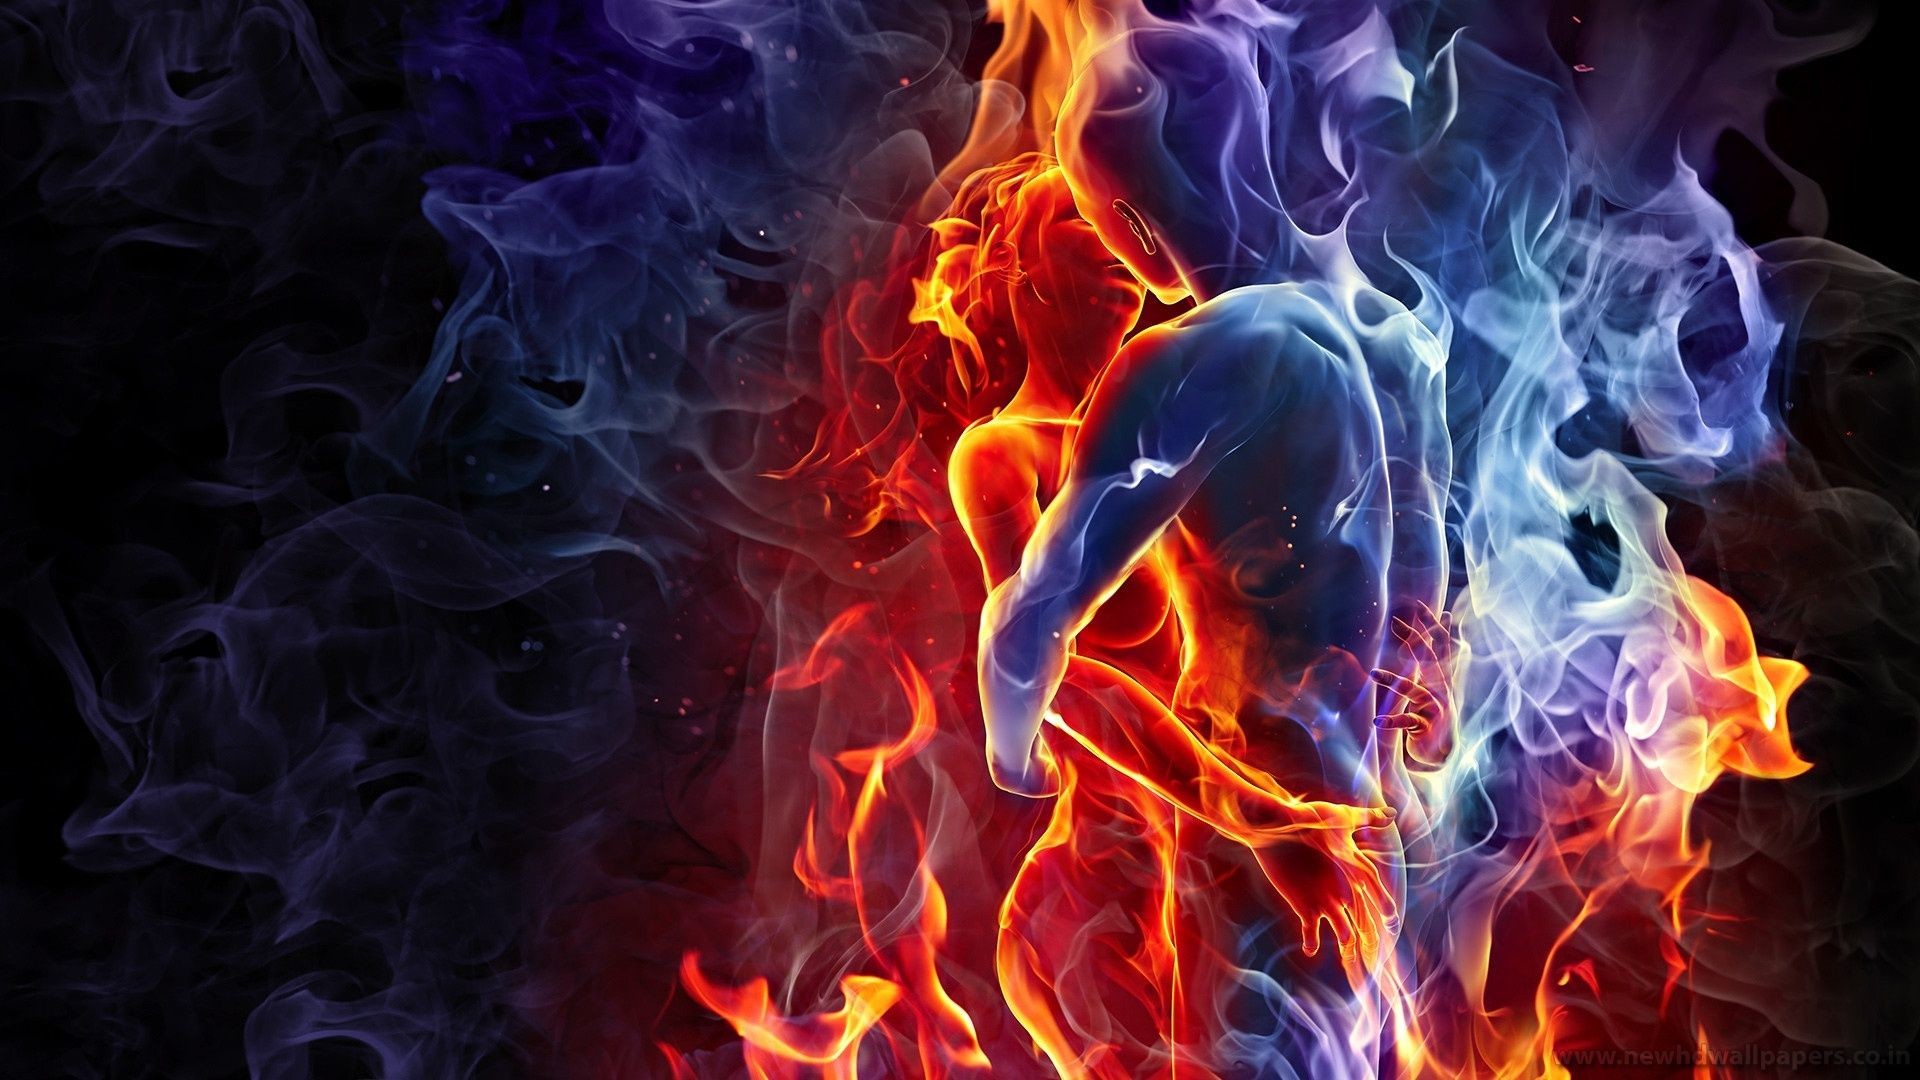 45 Cool Fire and Ice Wallpapers  WallpaperSafari